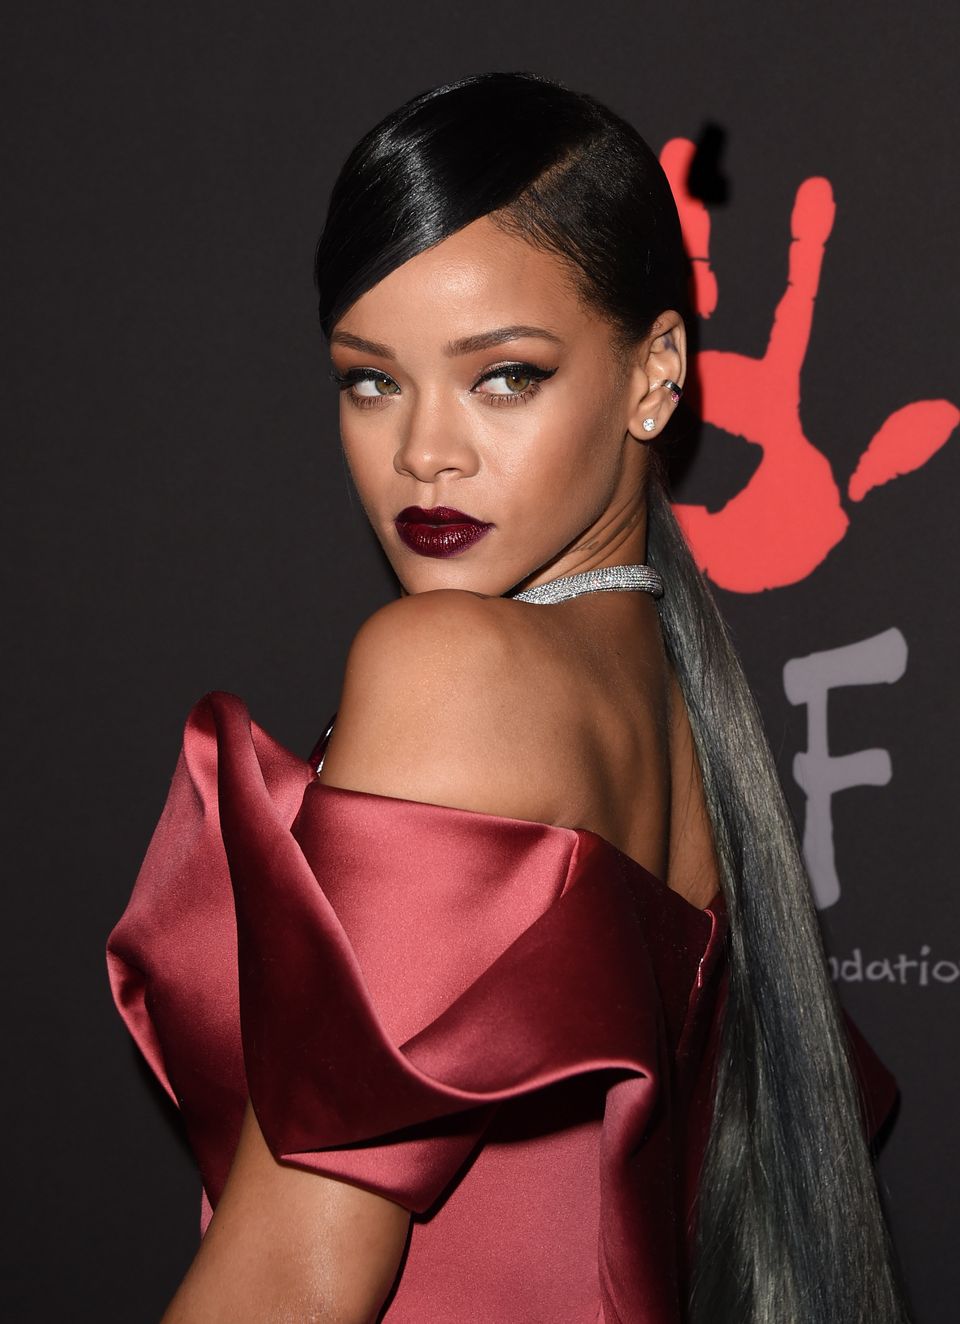 40 Rihanna Hairstyles To Inspire Your Next Makeover | HuffPost Life